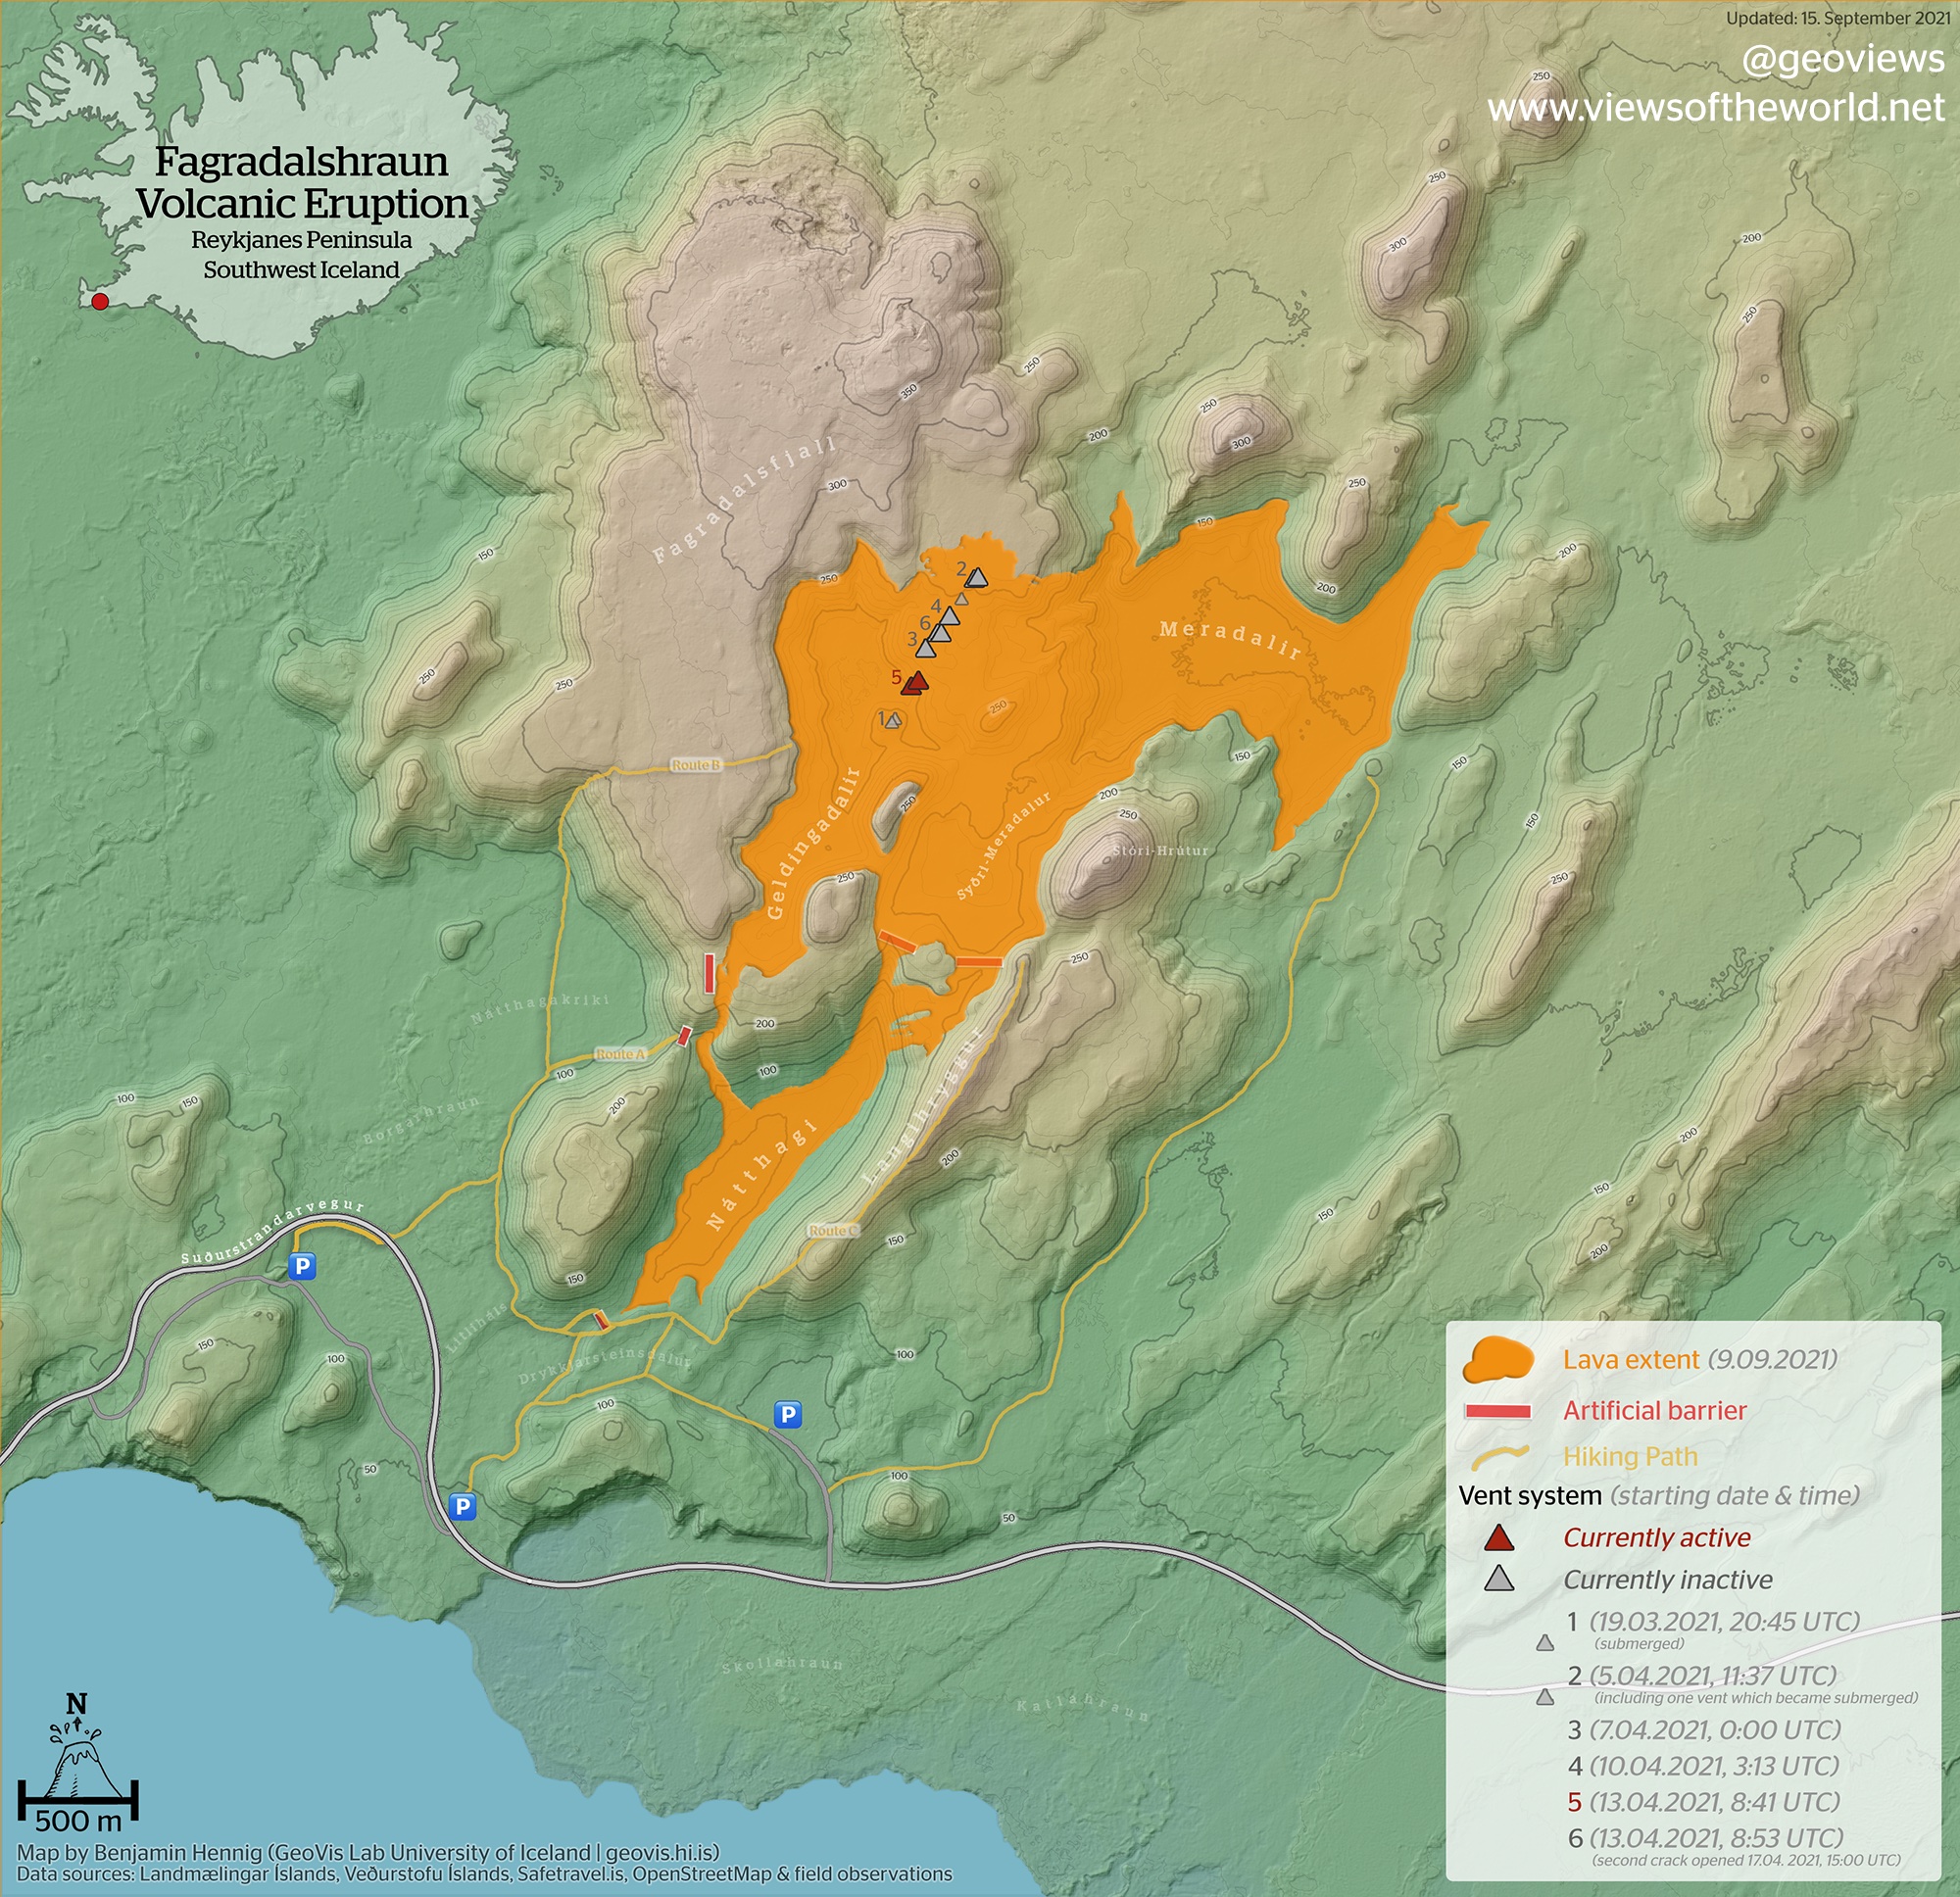 A new lava flow map of the current eruption from 15 September (image: @geoviews/twitter)